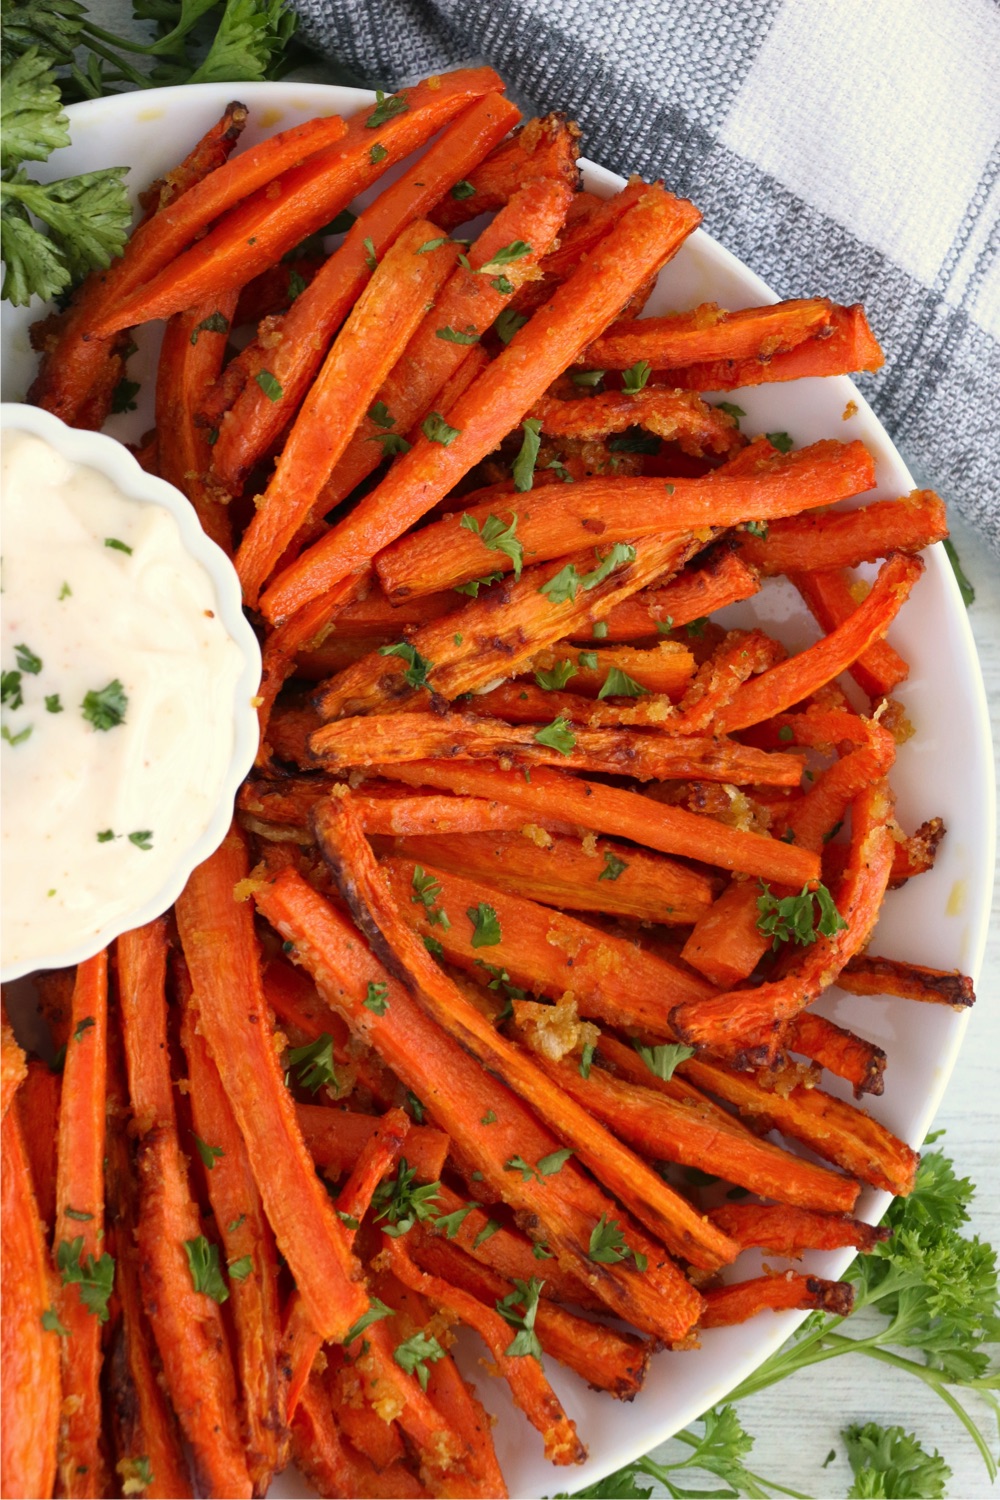 plate of fanned out carrot fries with dipping sauce